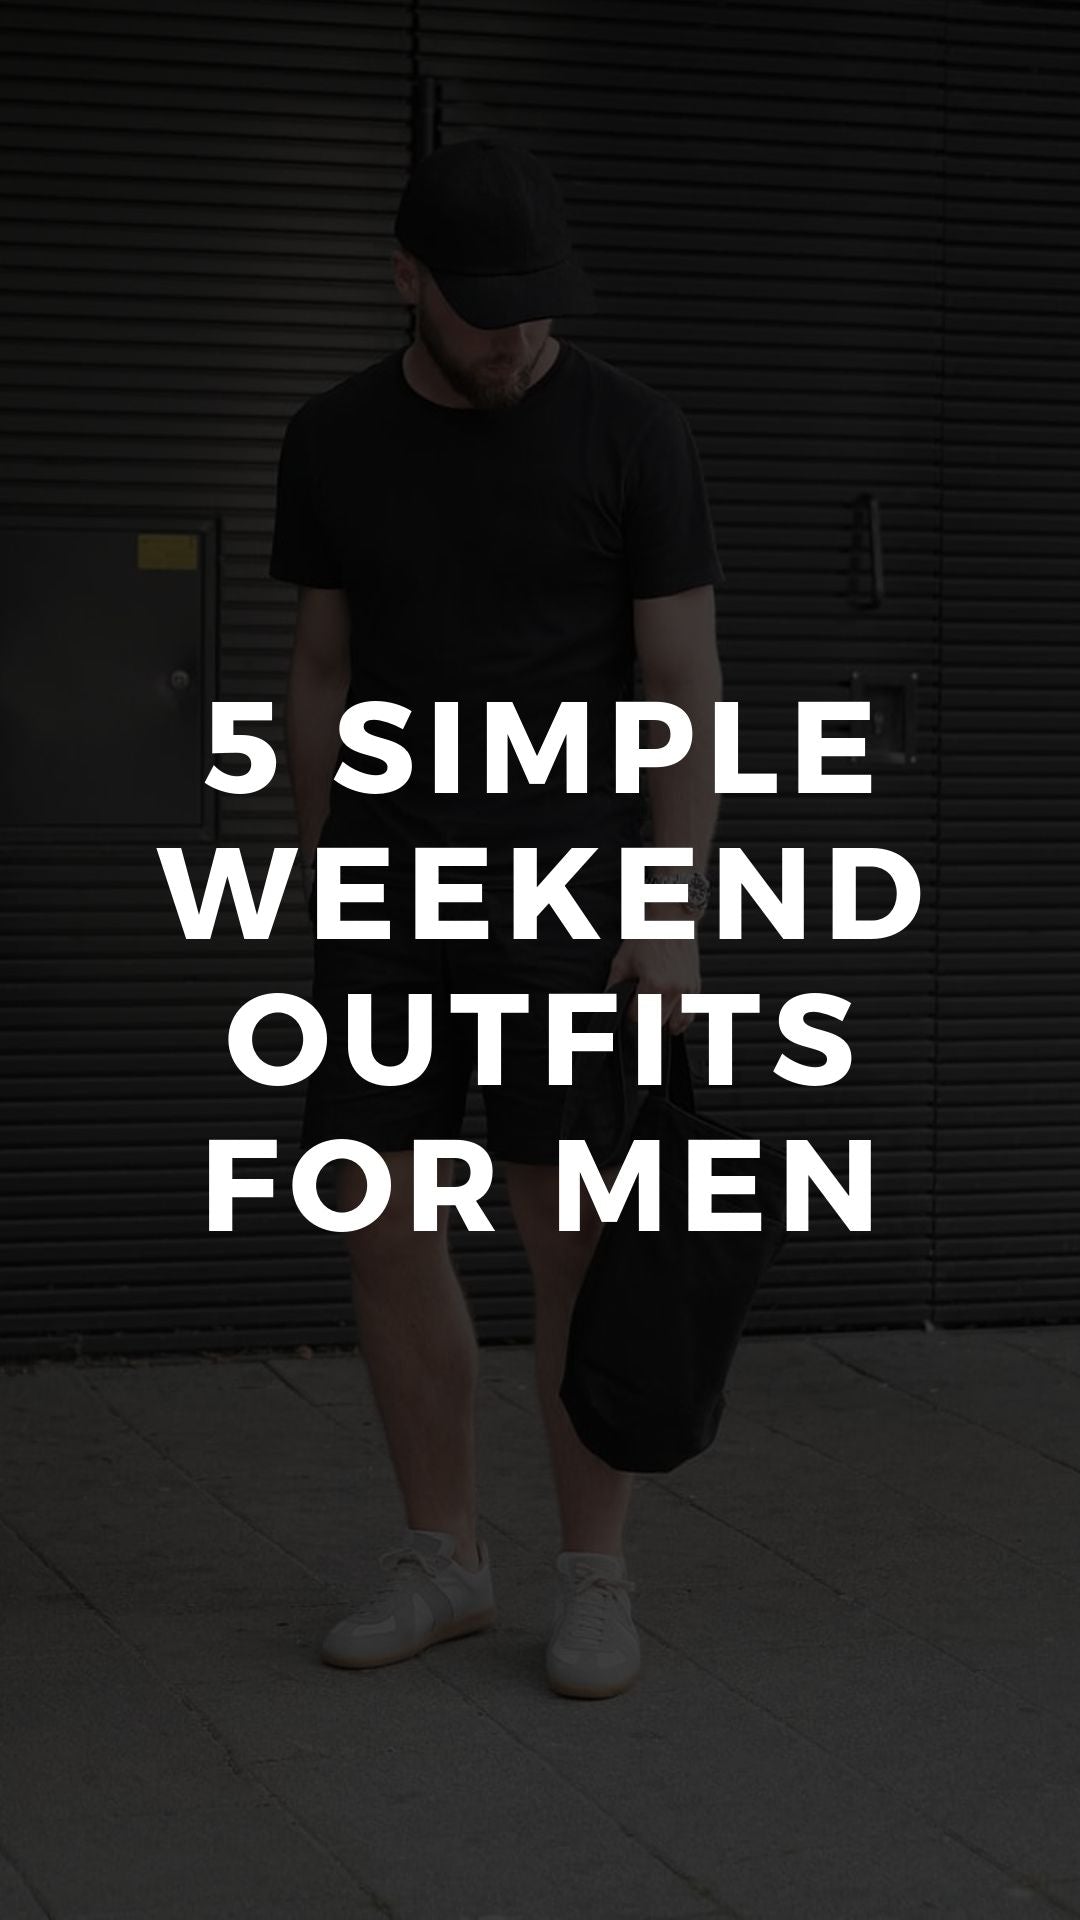 5 Simple Weekend Outfits For Men #simple #outfits #mens #fashion